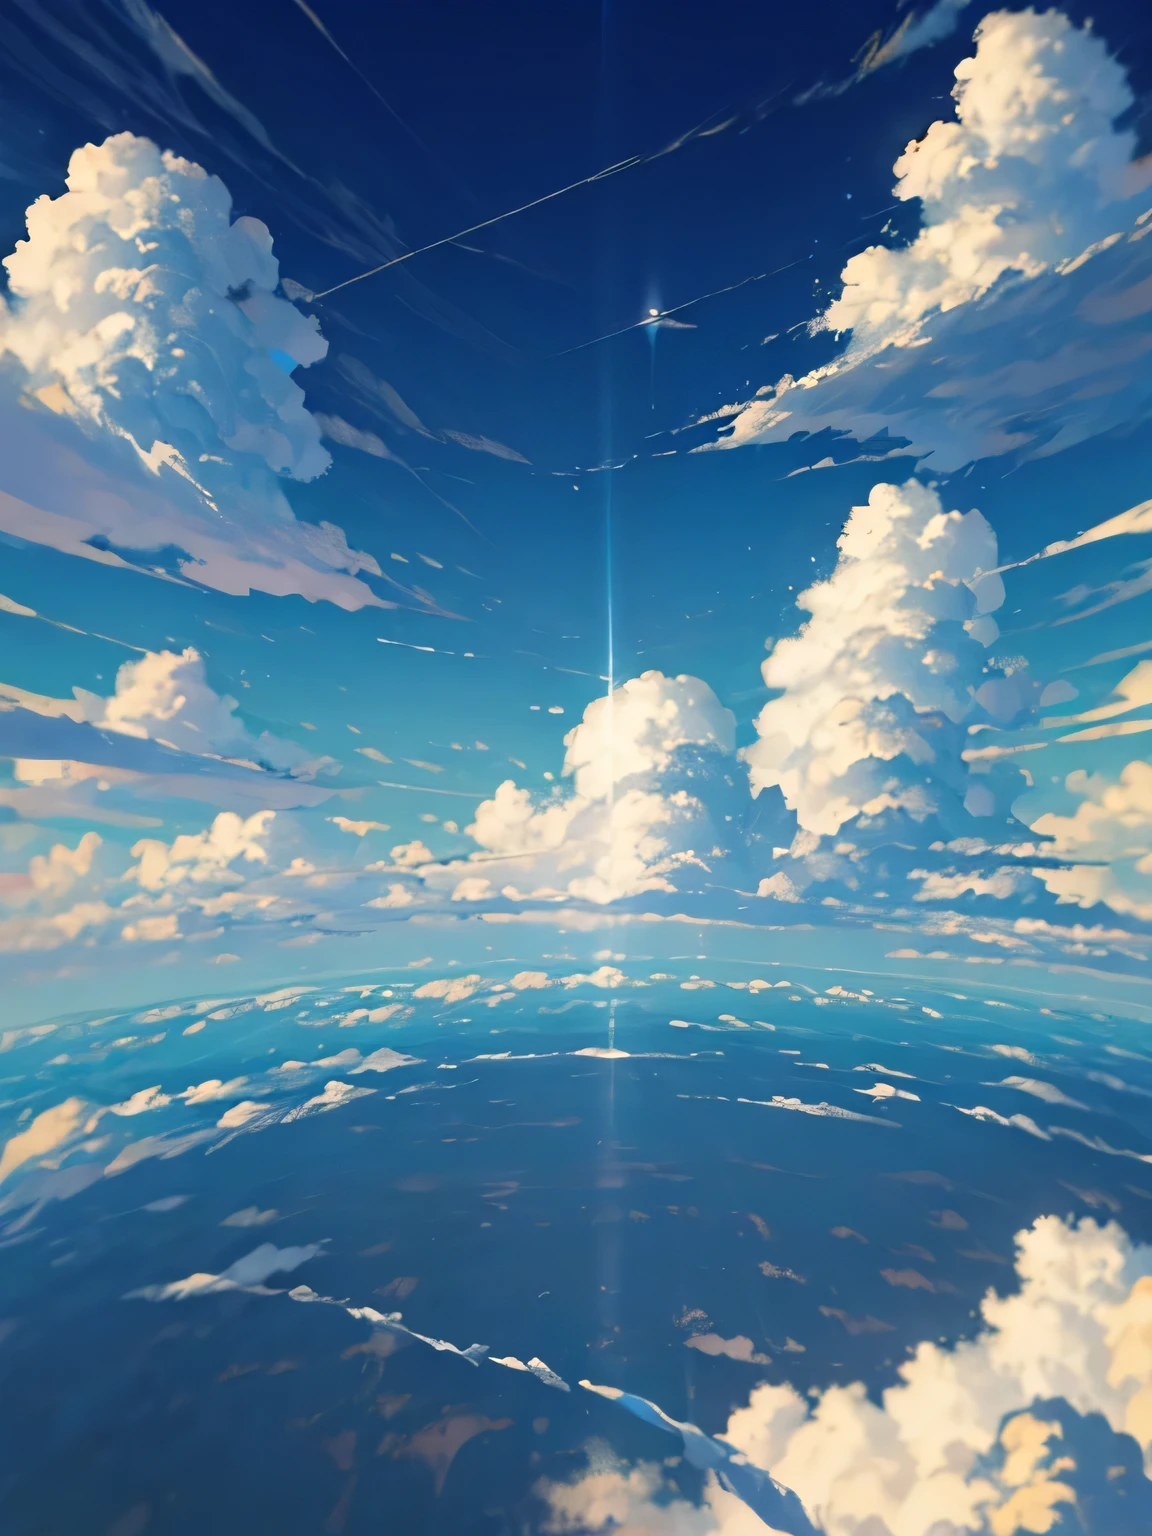 (highres,photorealistic),blue sky filled with fluffy clouds,realistic clouds in a clear blue sky,sunlight illuminating white clouds,serene atmosphere,fluffy cumulus clouds,dreamy sky,scattered clouds floating in the blue sky,vibrant blue color,soft sunlight,peaceful and calm ambiance,serene and tranquil scene,vivid and natural colors,gentle and wispy cloud formations,puffy and cotton-like clouds,seamless transition between sky and clouds,crisp and clear air,celestial beauty,ethereal and heavenly atmosphere